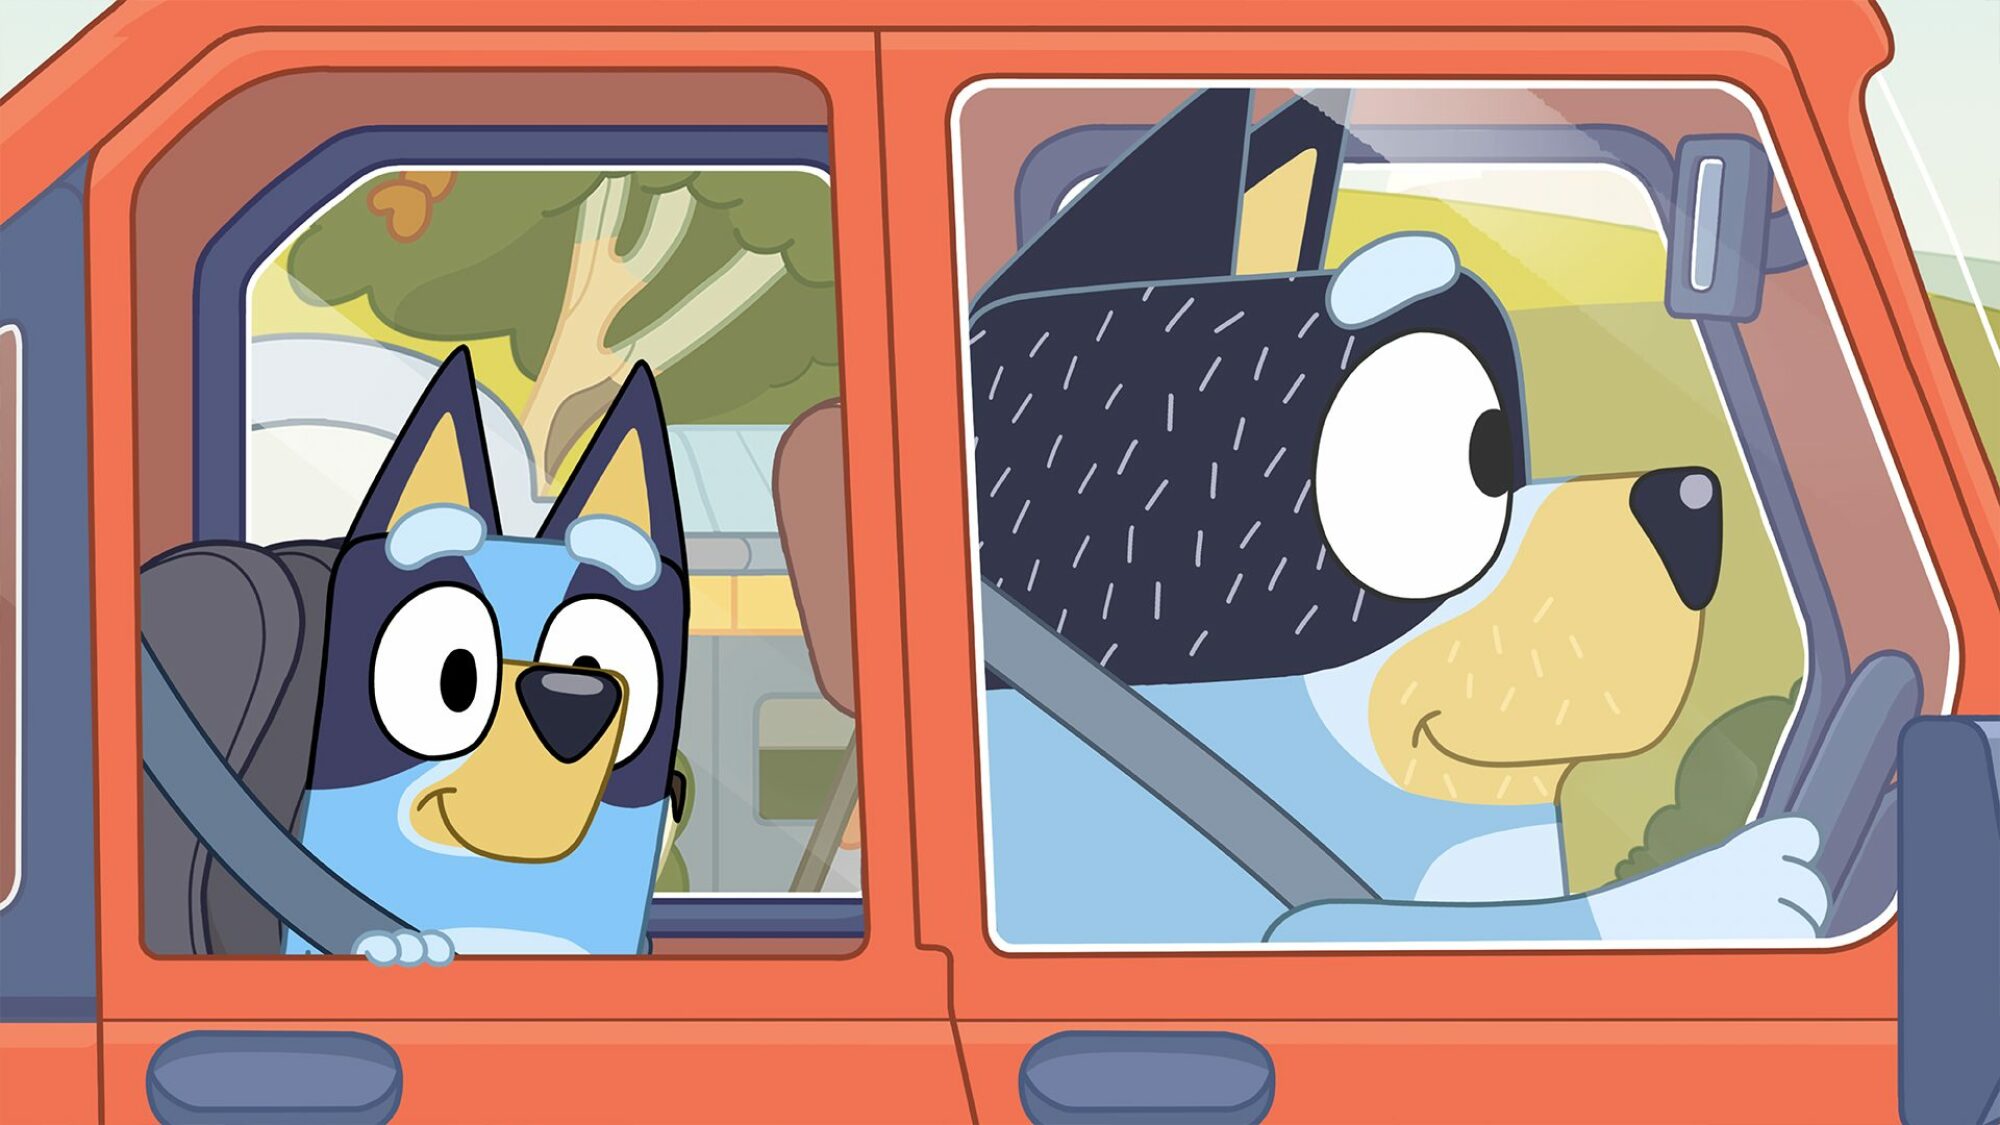 Bluey in the backseat of a car, looking out the window with a smile as her father Bingo drives.